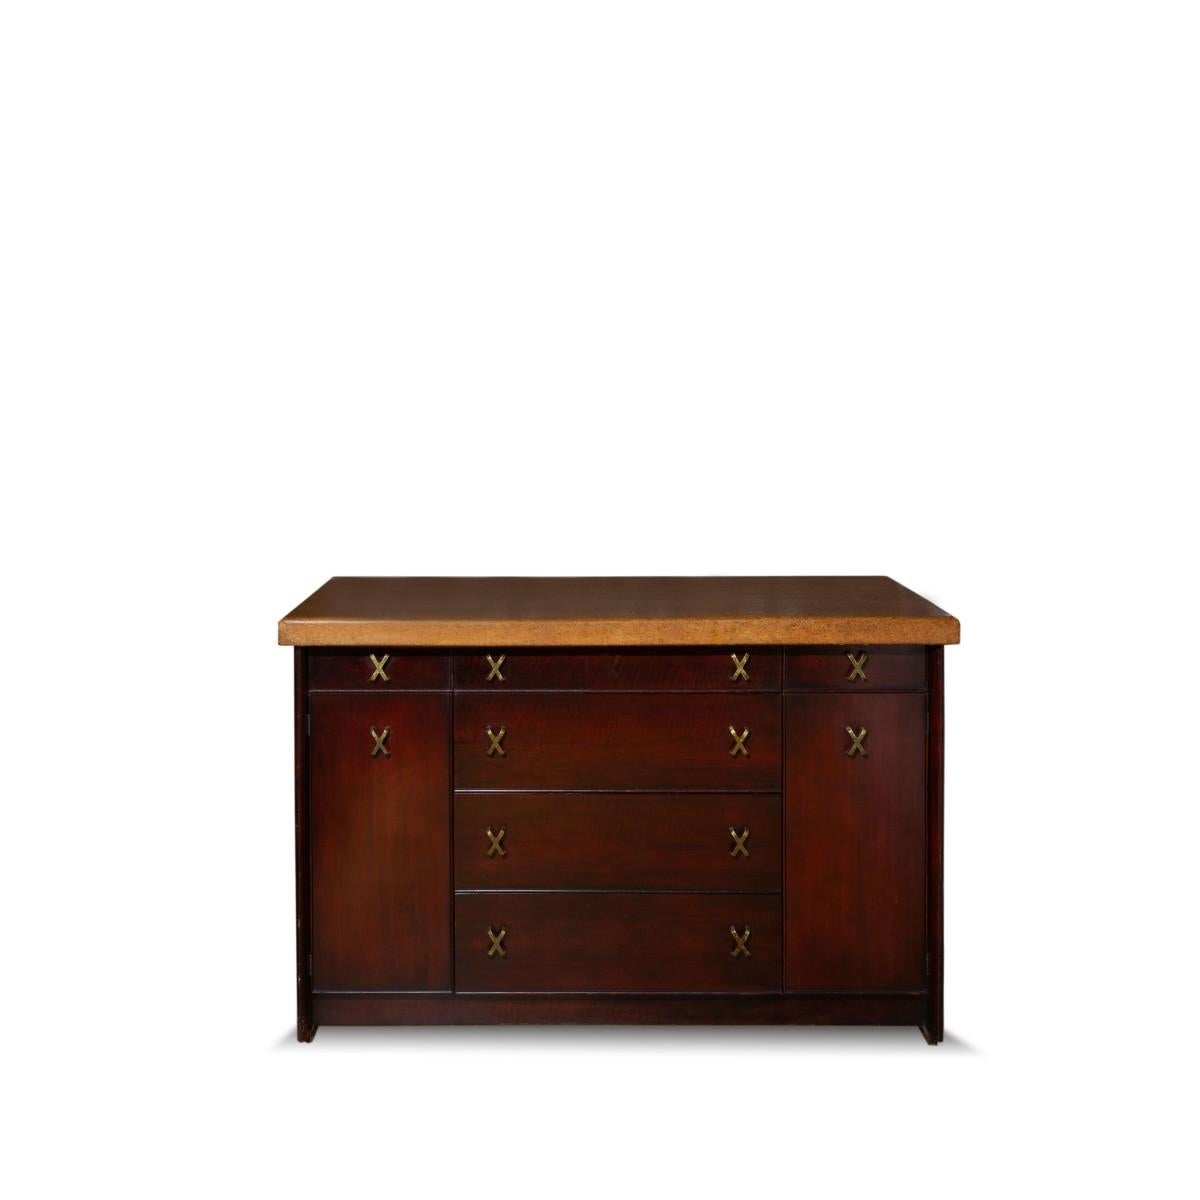 American Paul Frankl Sideboard Cabinet by Johnson Furniture Co.